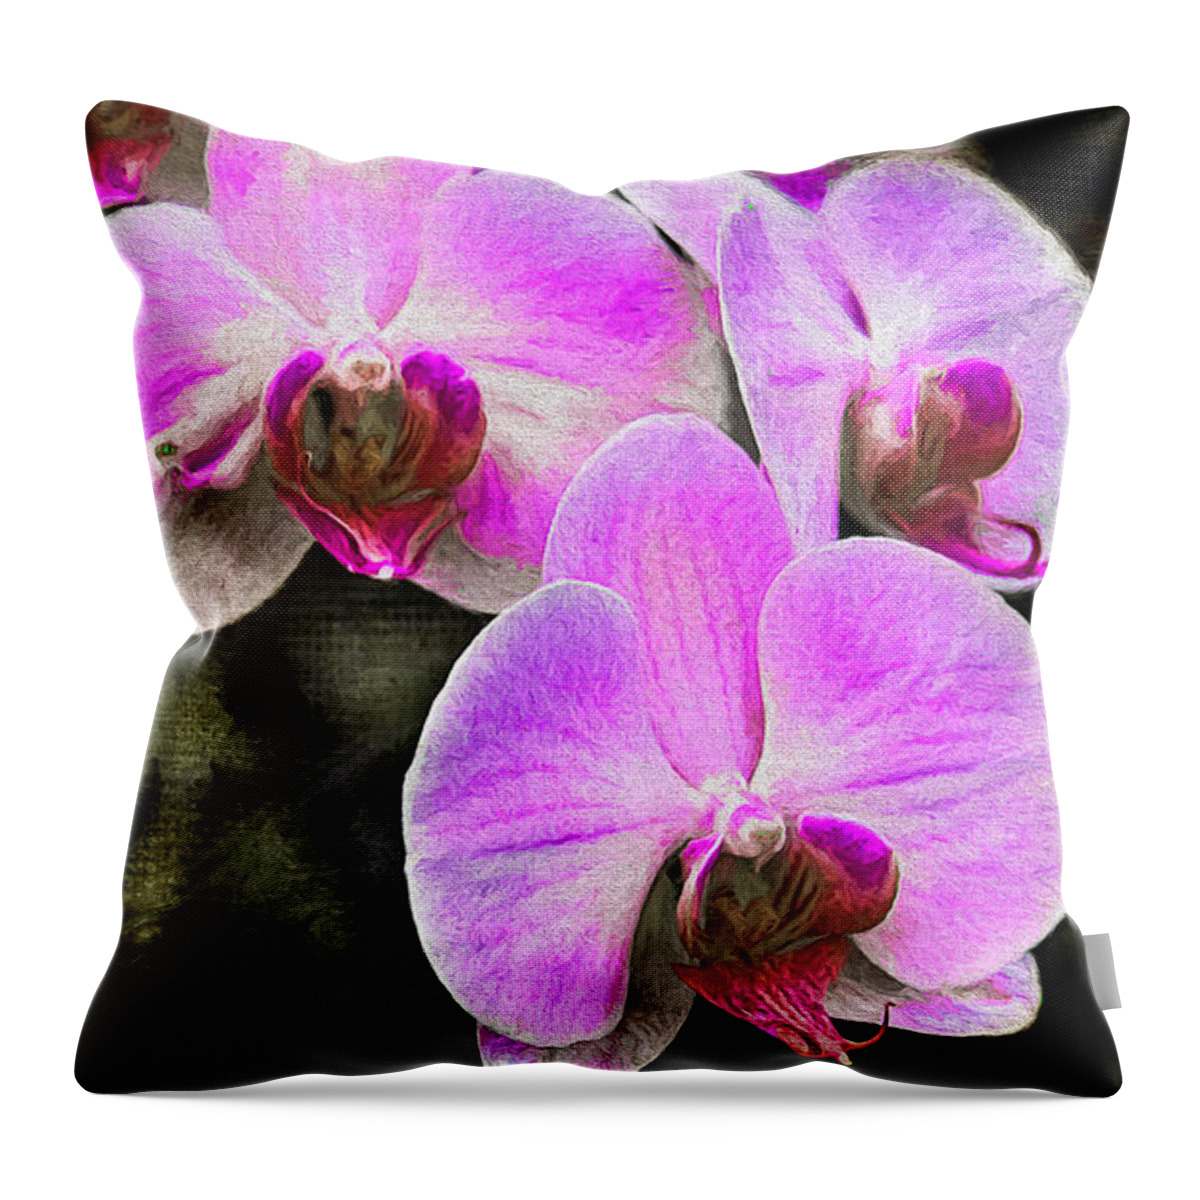 Orchid Throw Pillow featuring the photograph Pink Orchid by Reynaldo Williams